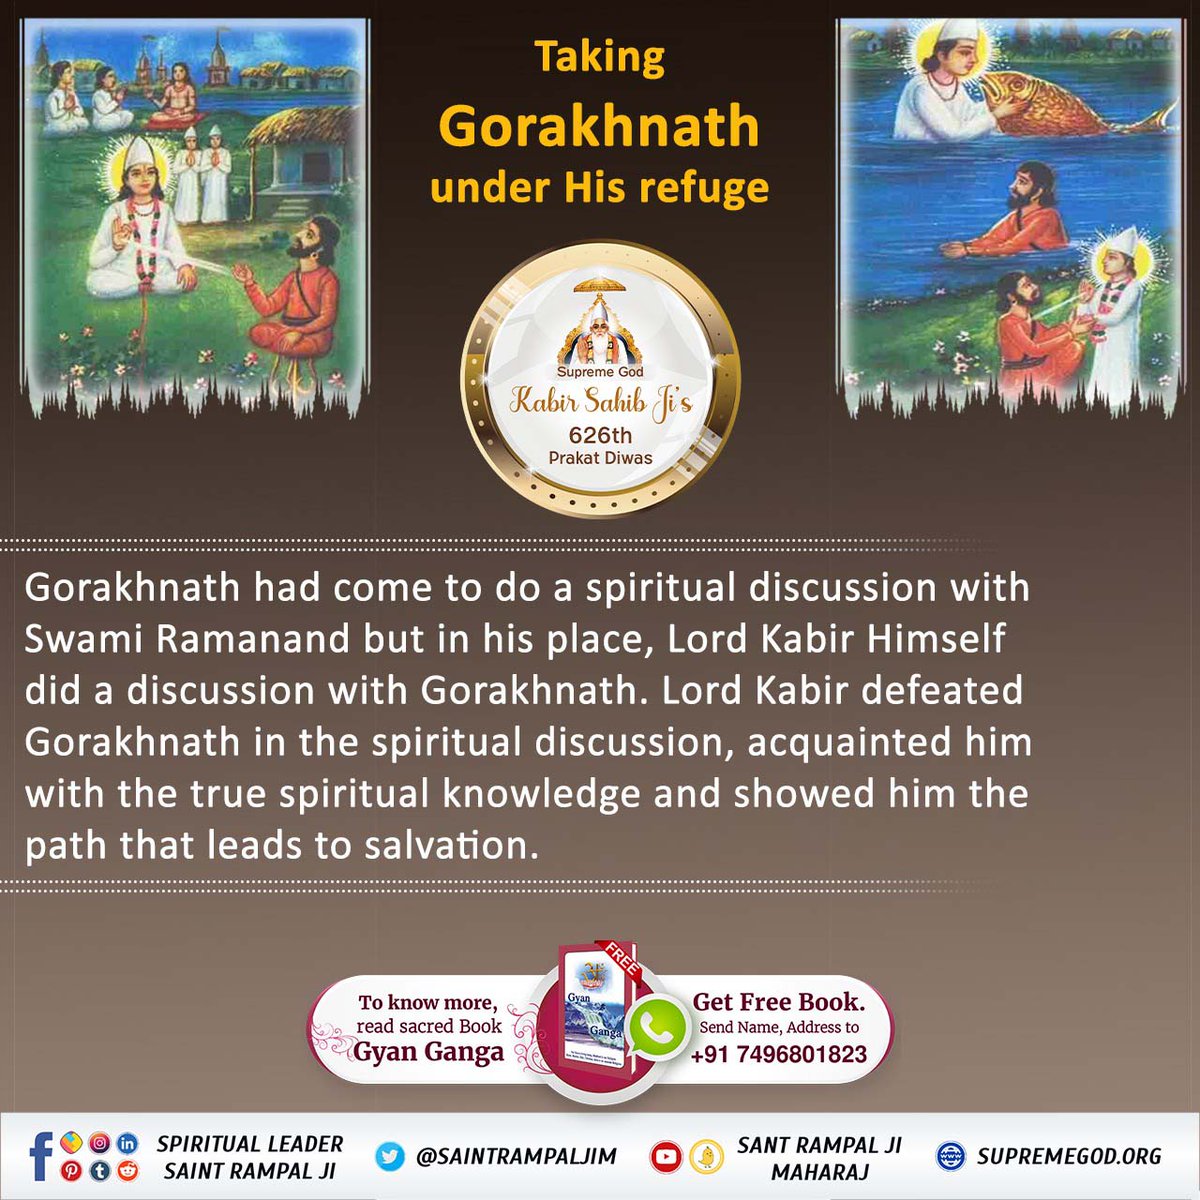 #Unbelievable_Miracles_Of_God
Once when Gorakhnath ji was having a seminar with Kabir Parmeshwar ji, Gorakhnath ji planted a 5-6 feet trishul in the ground in front of Kabir ji and sat on it and said that if you want to talk, come and sit with me.
God Kabir Prakat Diwas